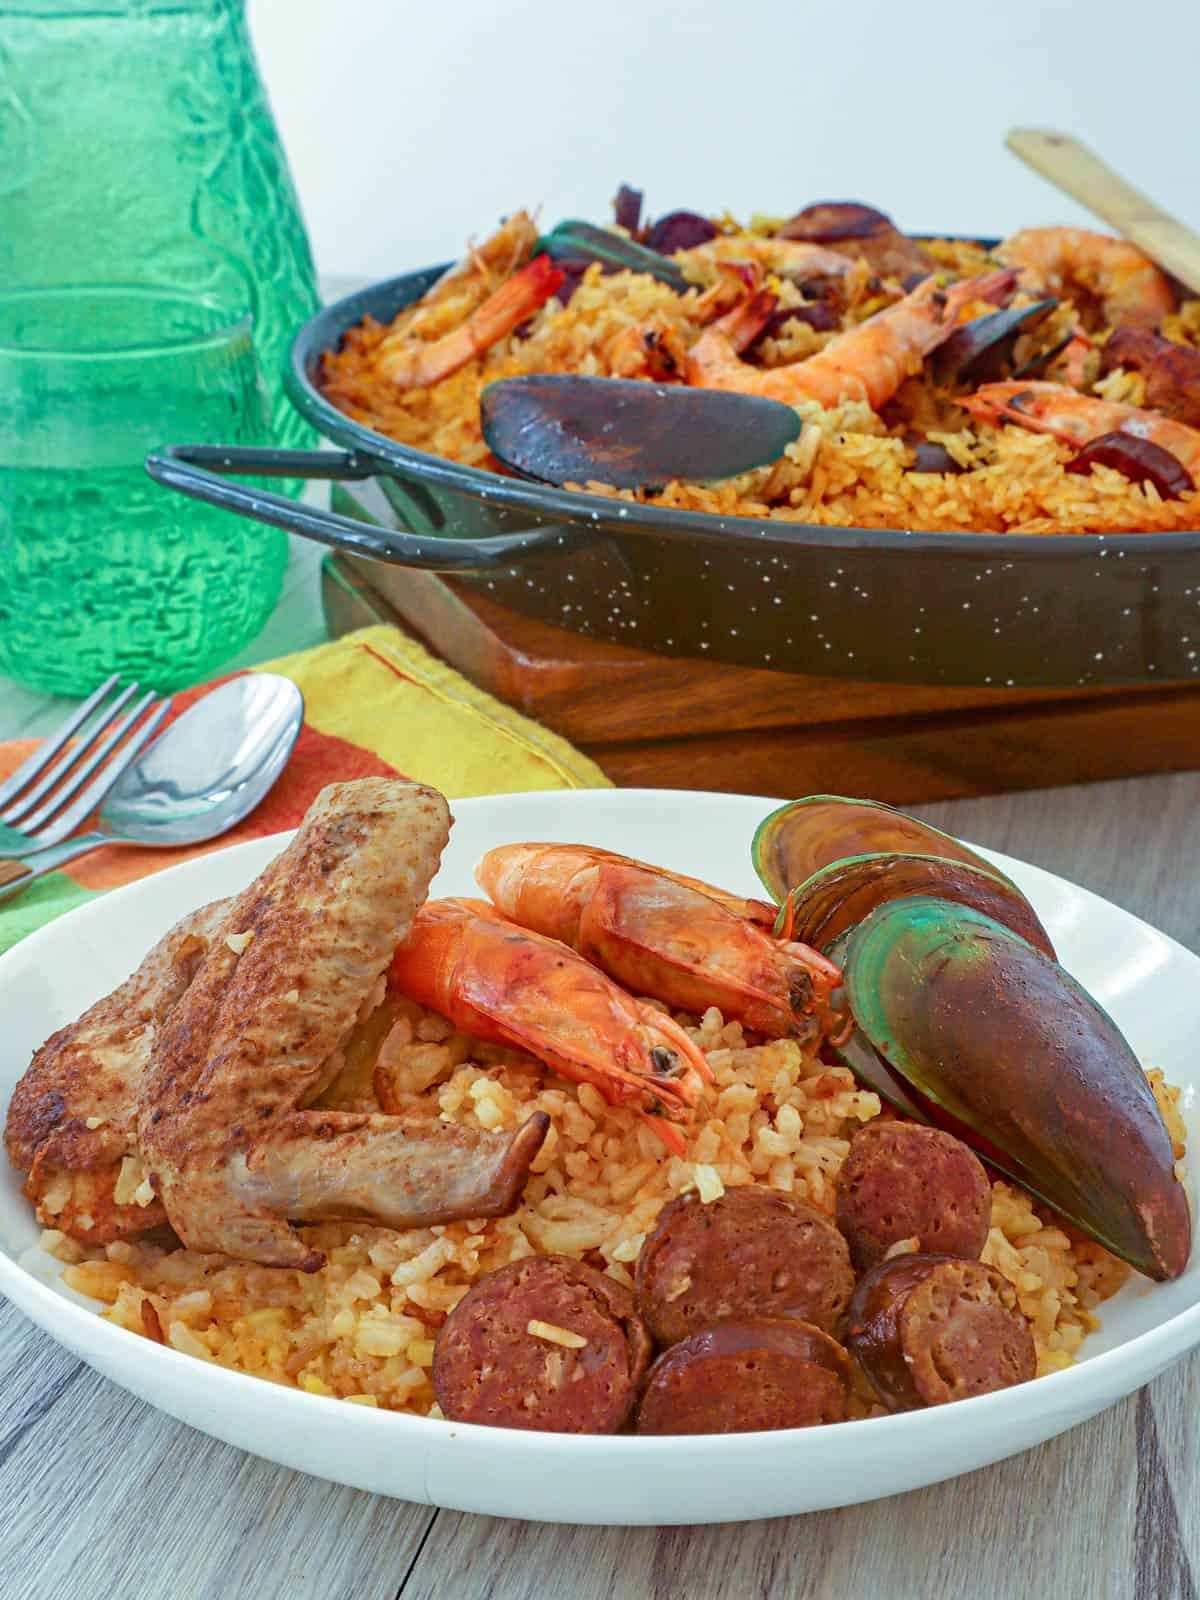 Mixed paella in a white serving bowl